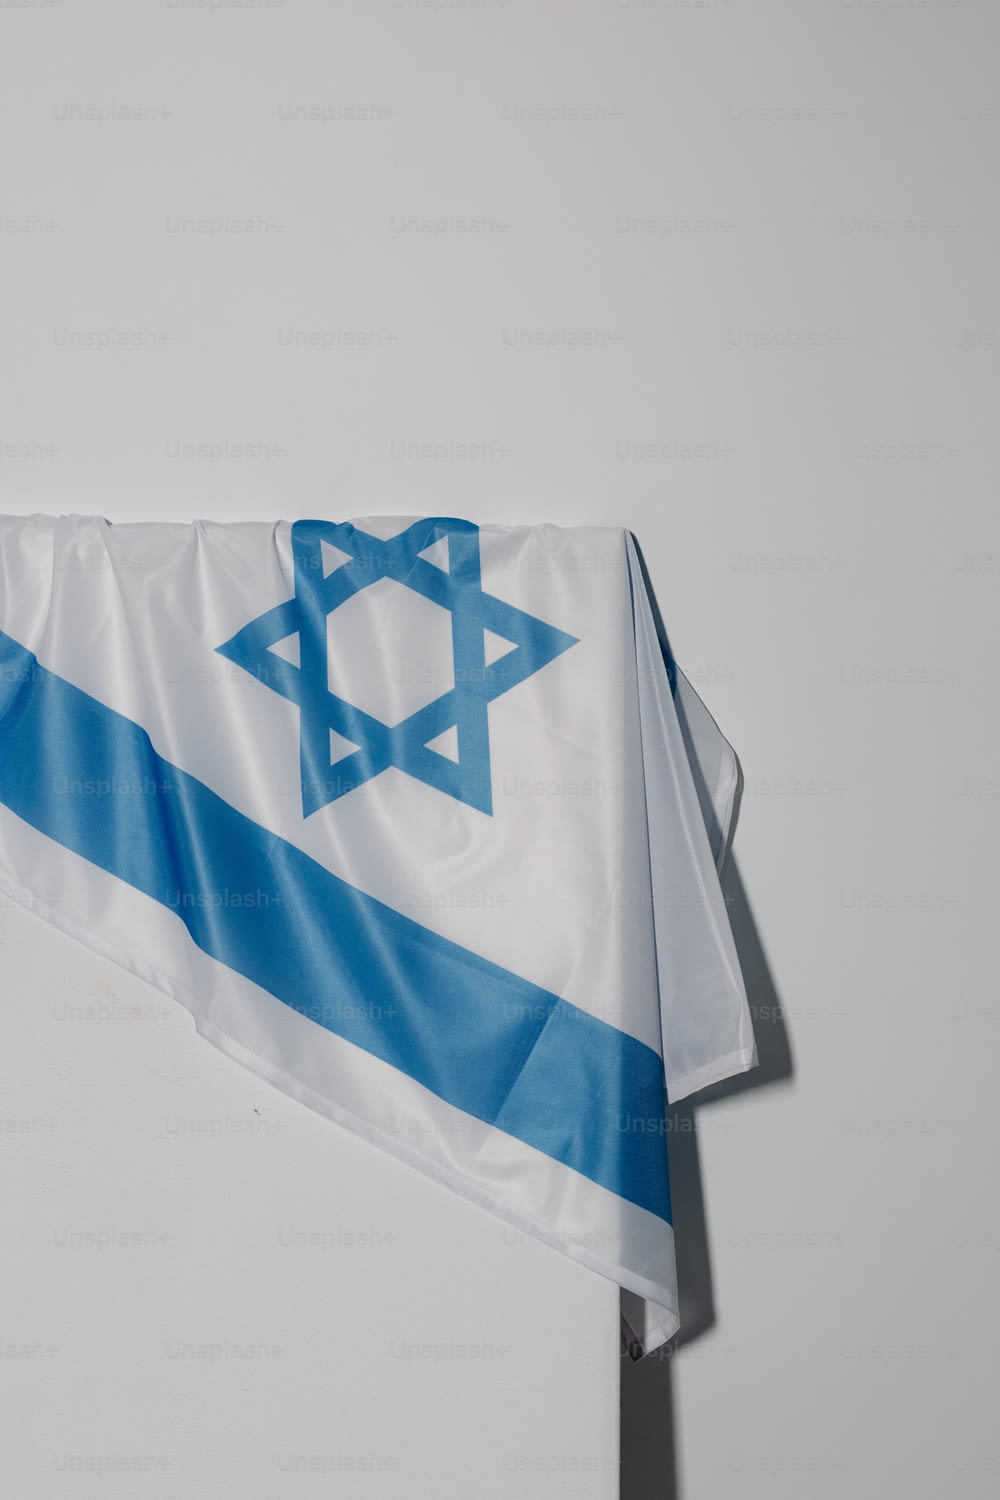 a flag with a star of david on it